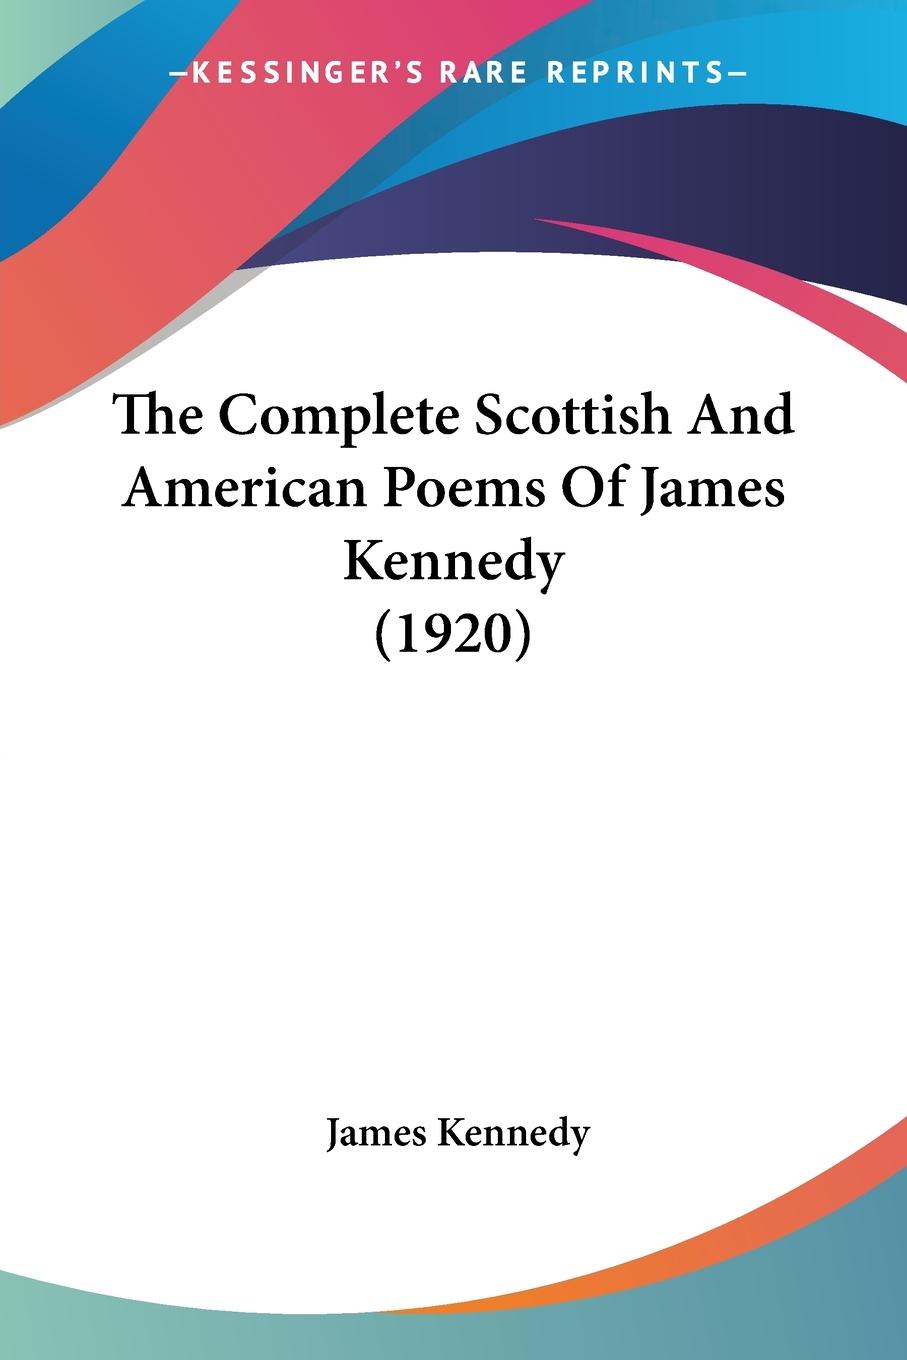 The Complete Scottish And American Poems Of James Kennedy (1920) - Kennedy, James